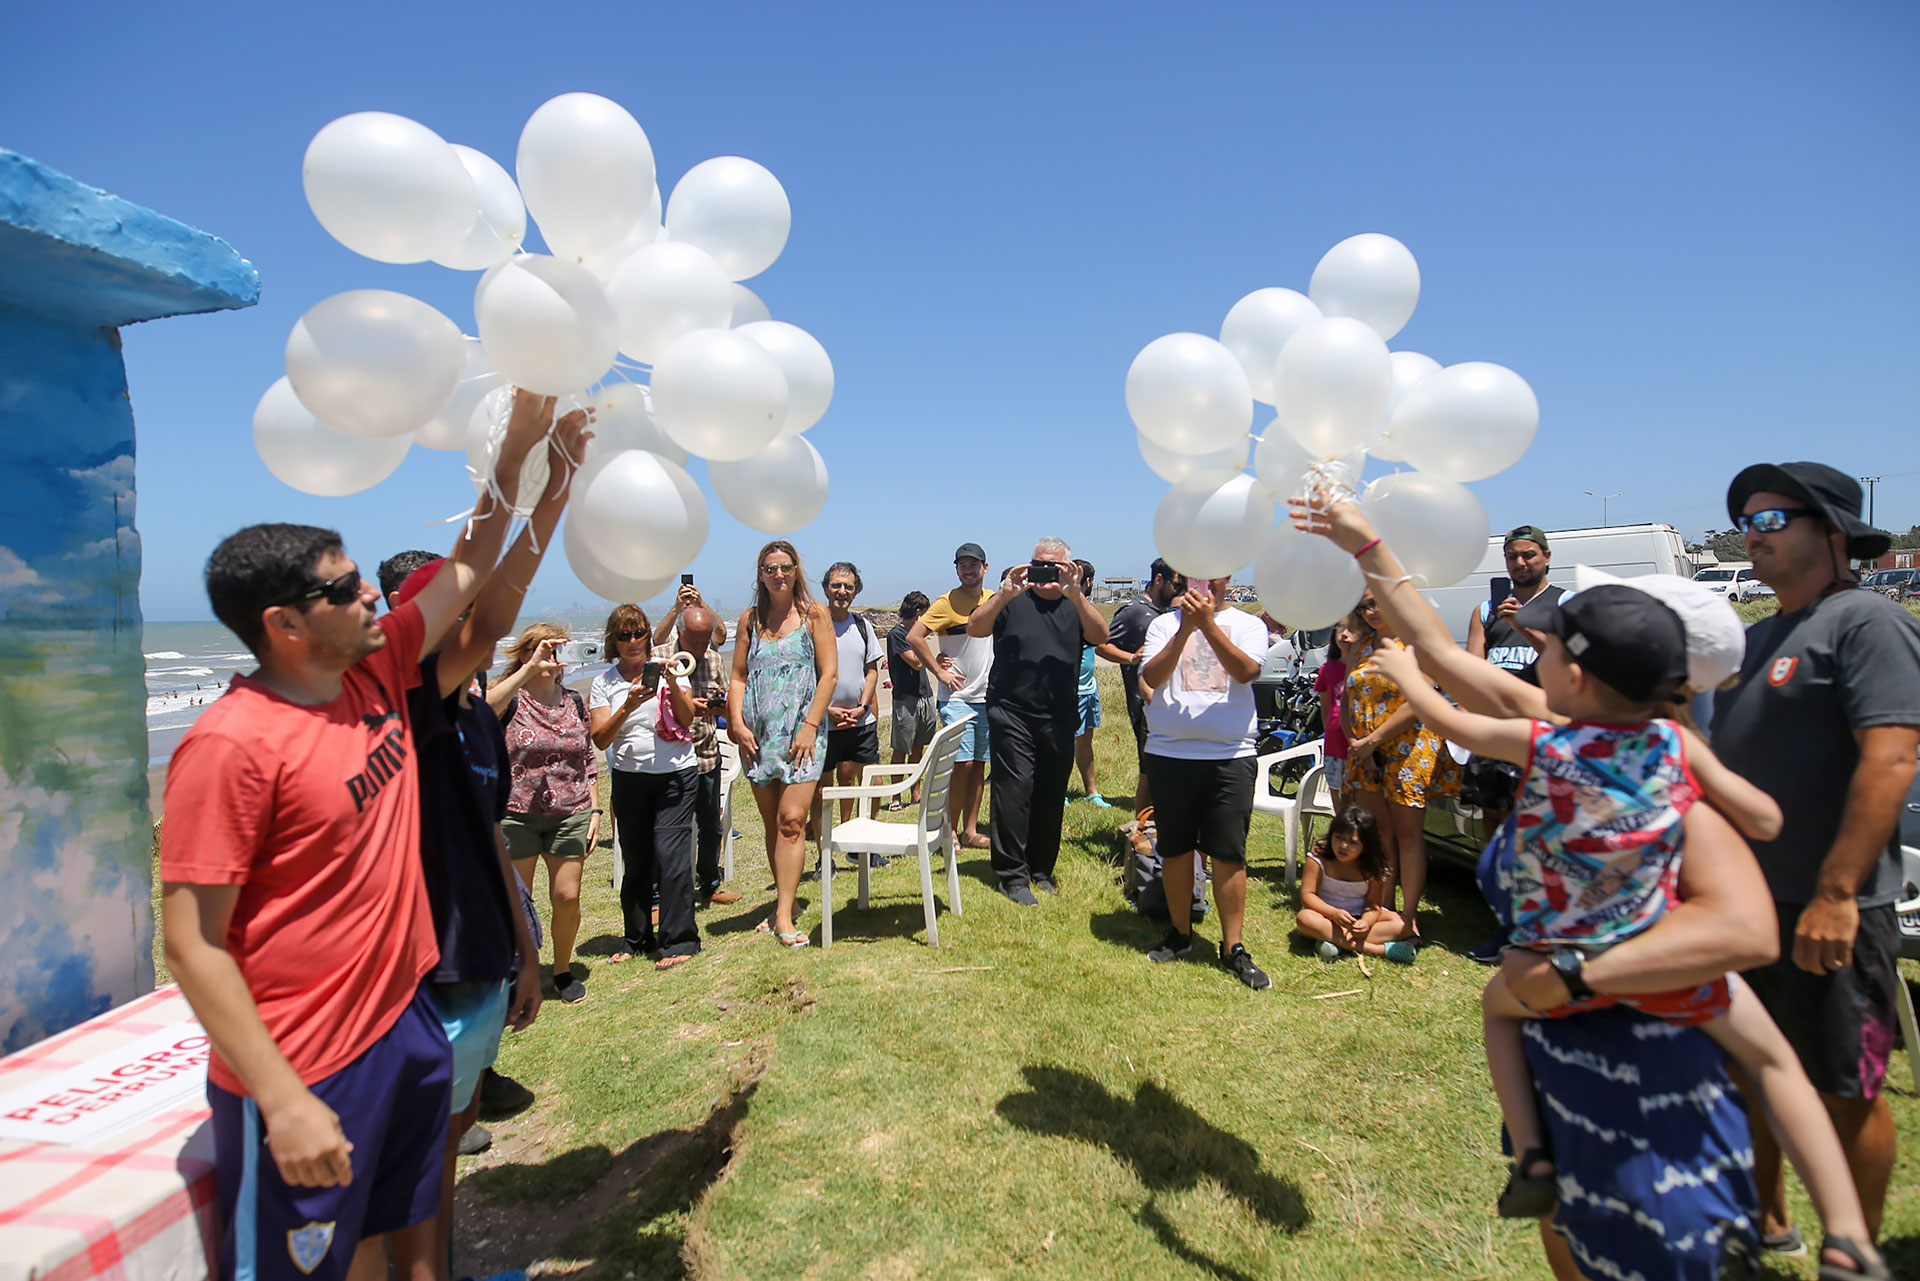 The activity was dedicated to promoting the generation of awareness for the dangers on the beaches: at the end there was a release of balloons in honor of Emma